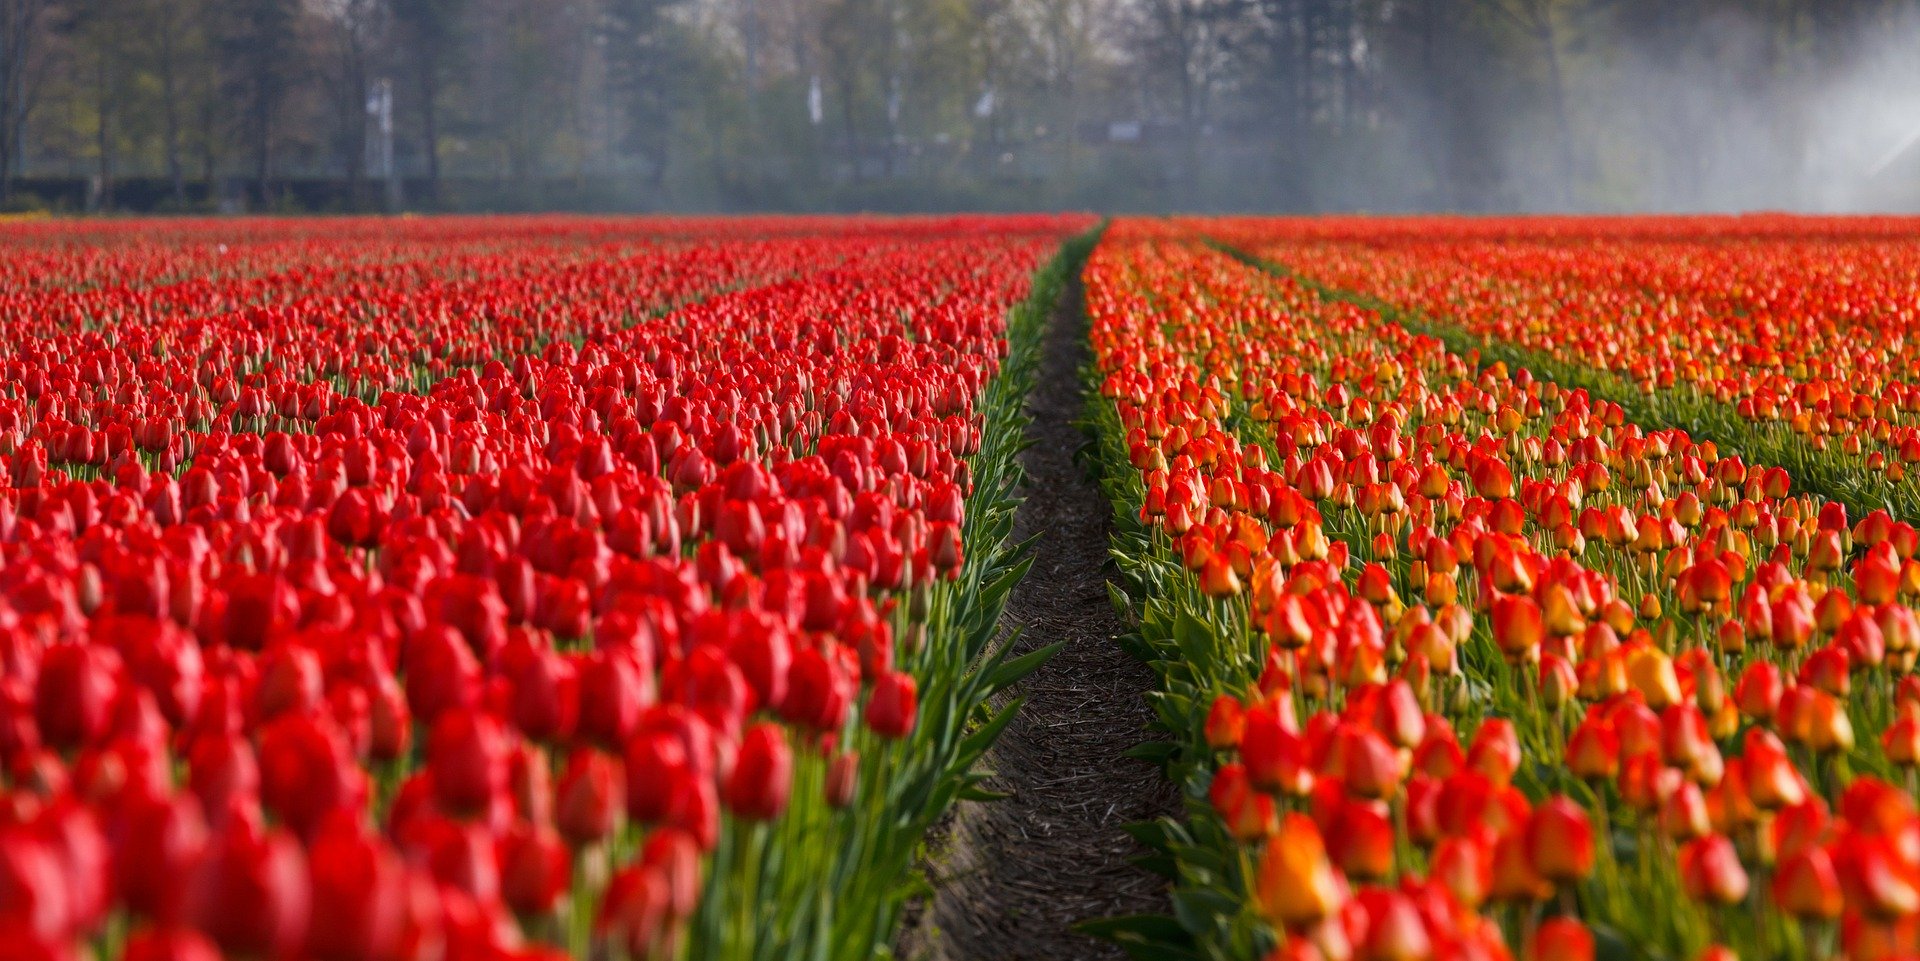 Rows of red tulips in bloom